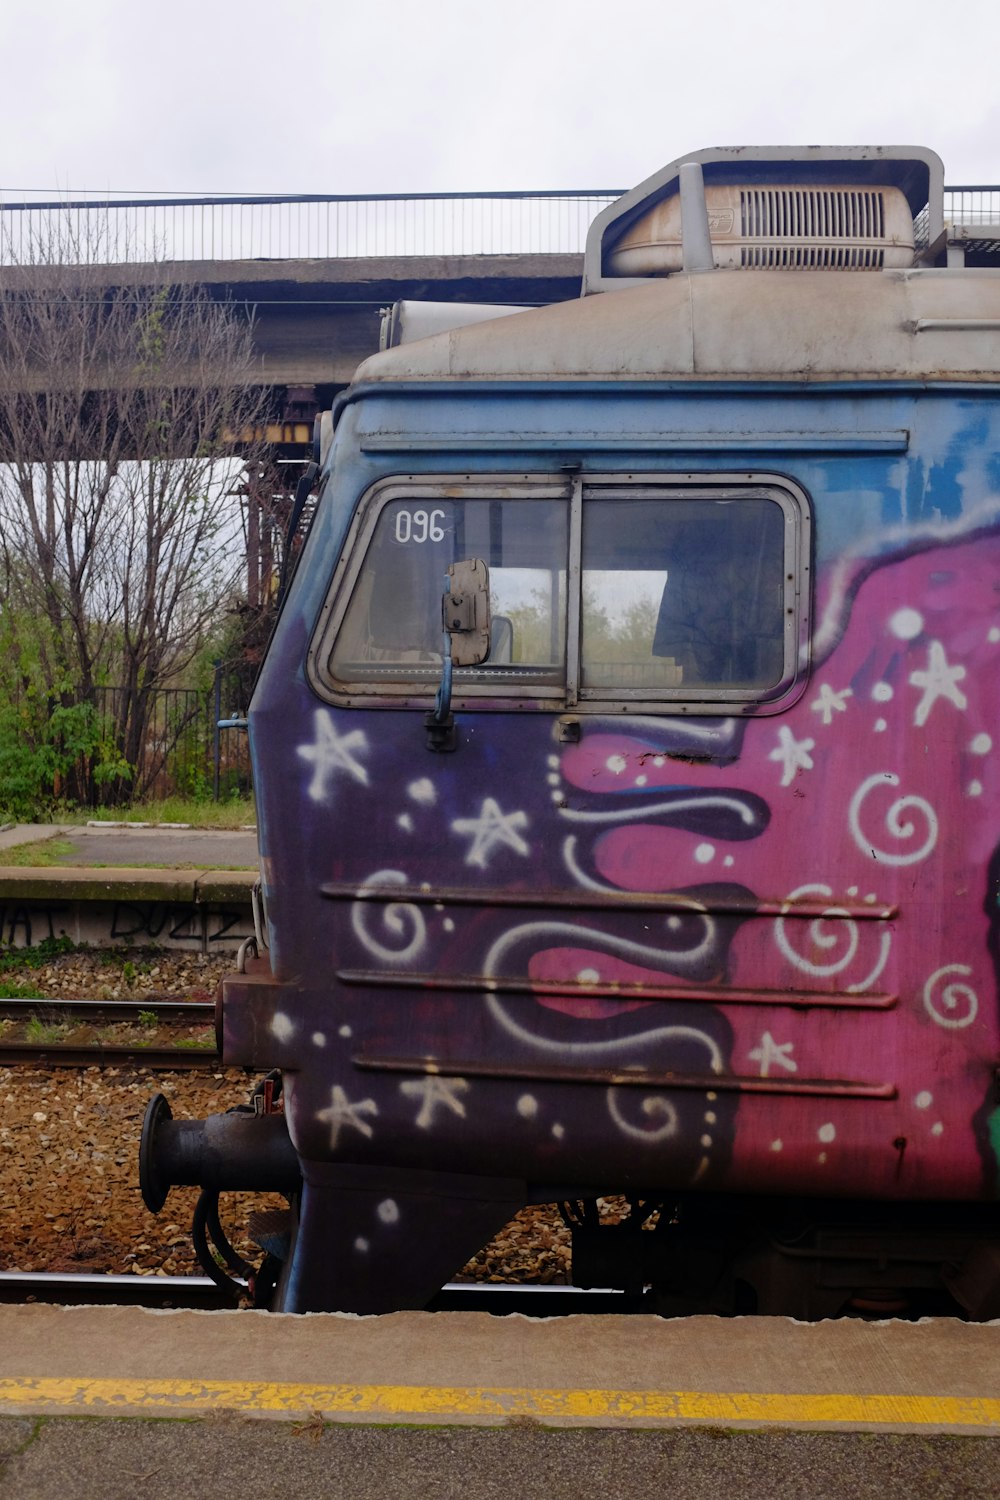 a train that has some graffiti on it